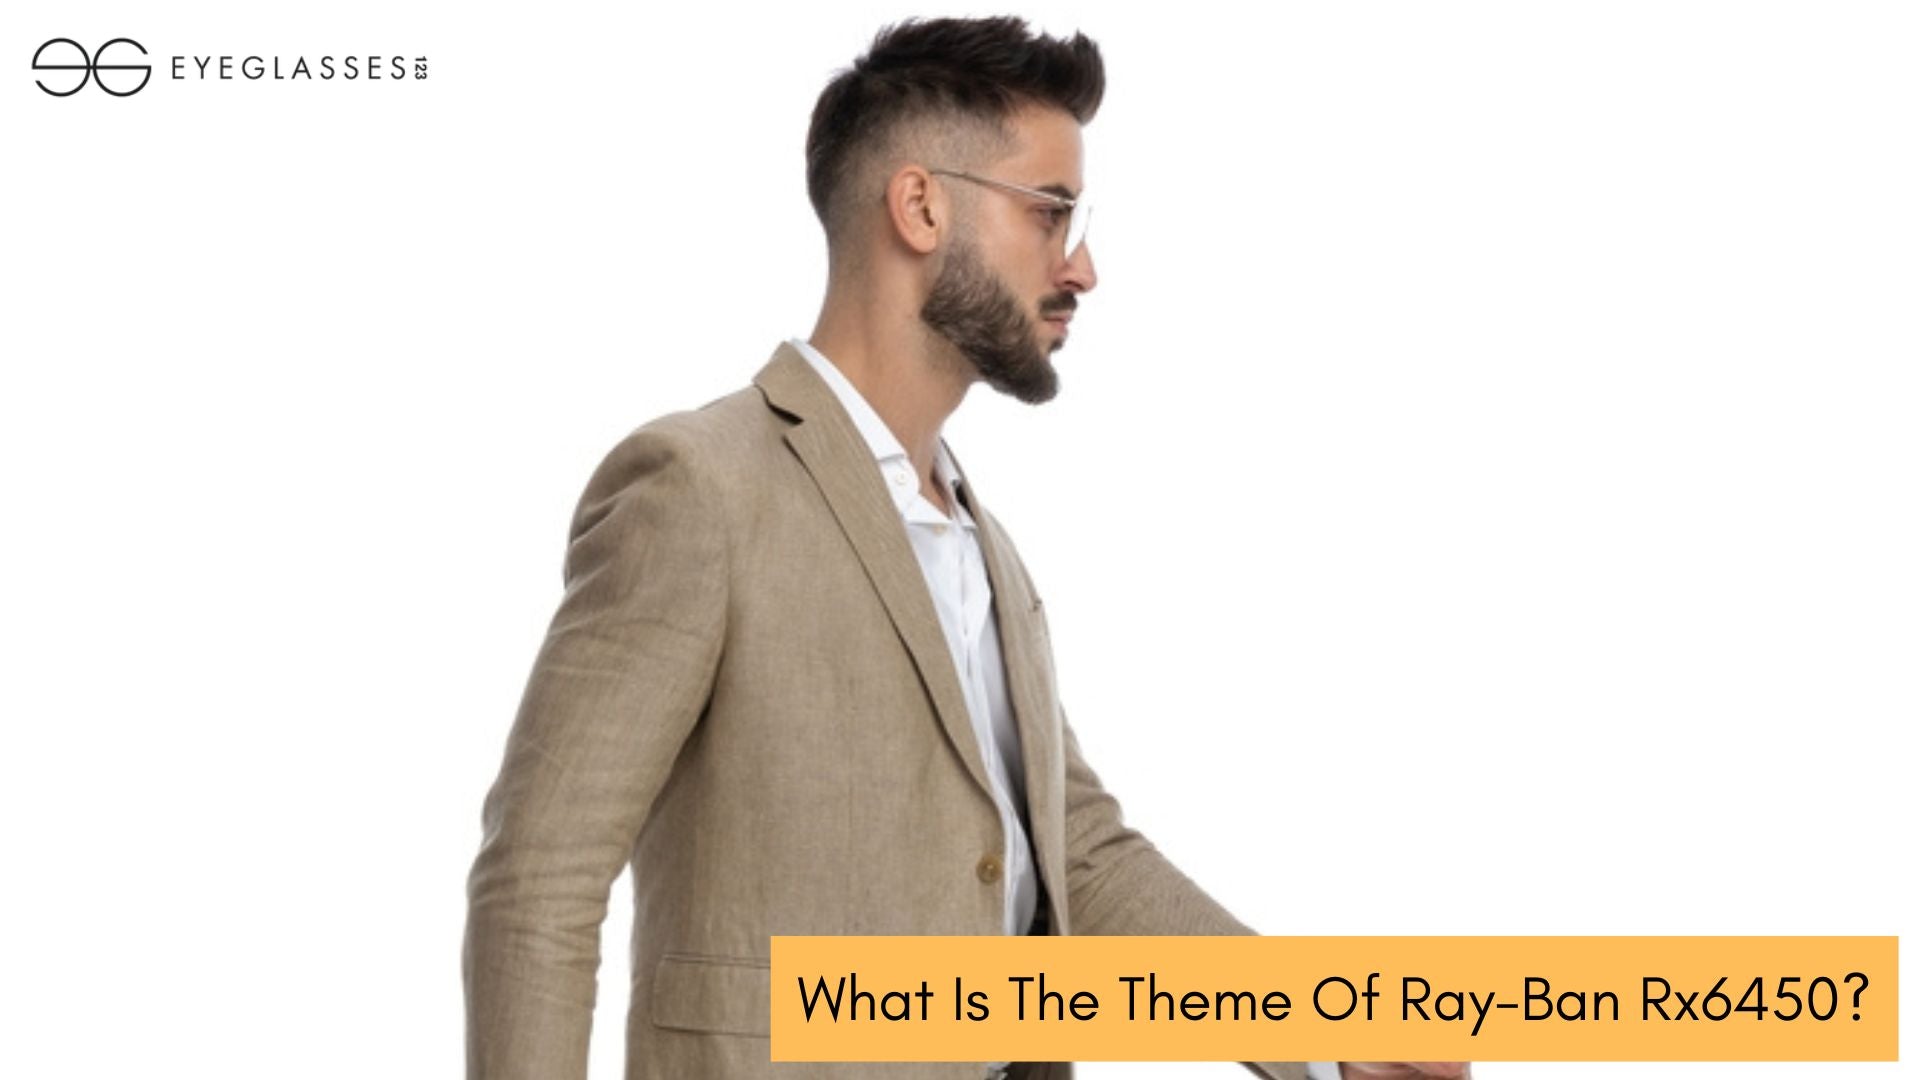 What Is The Theme Of Ray-Ban Rx6450?